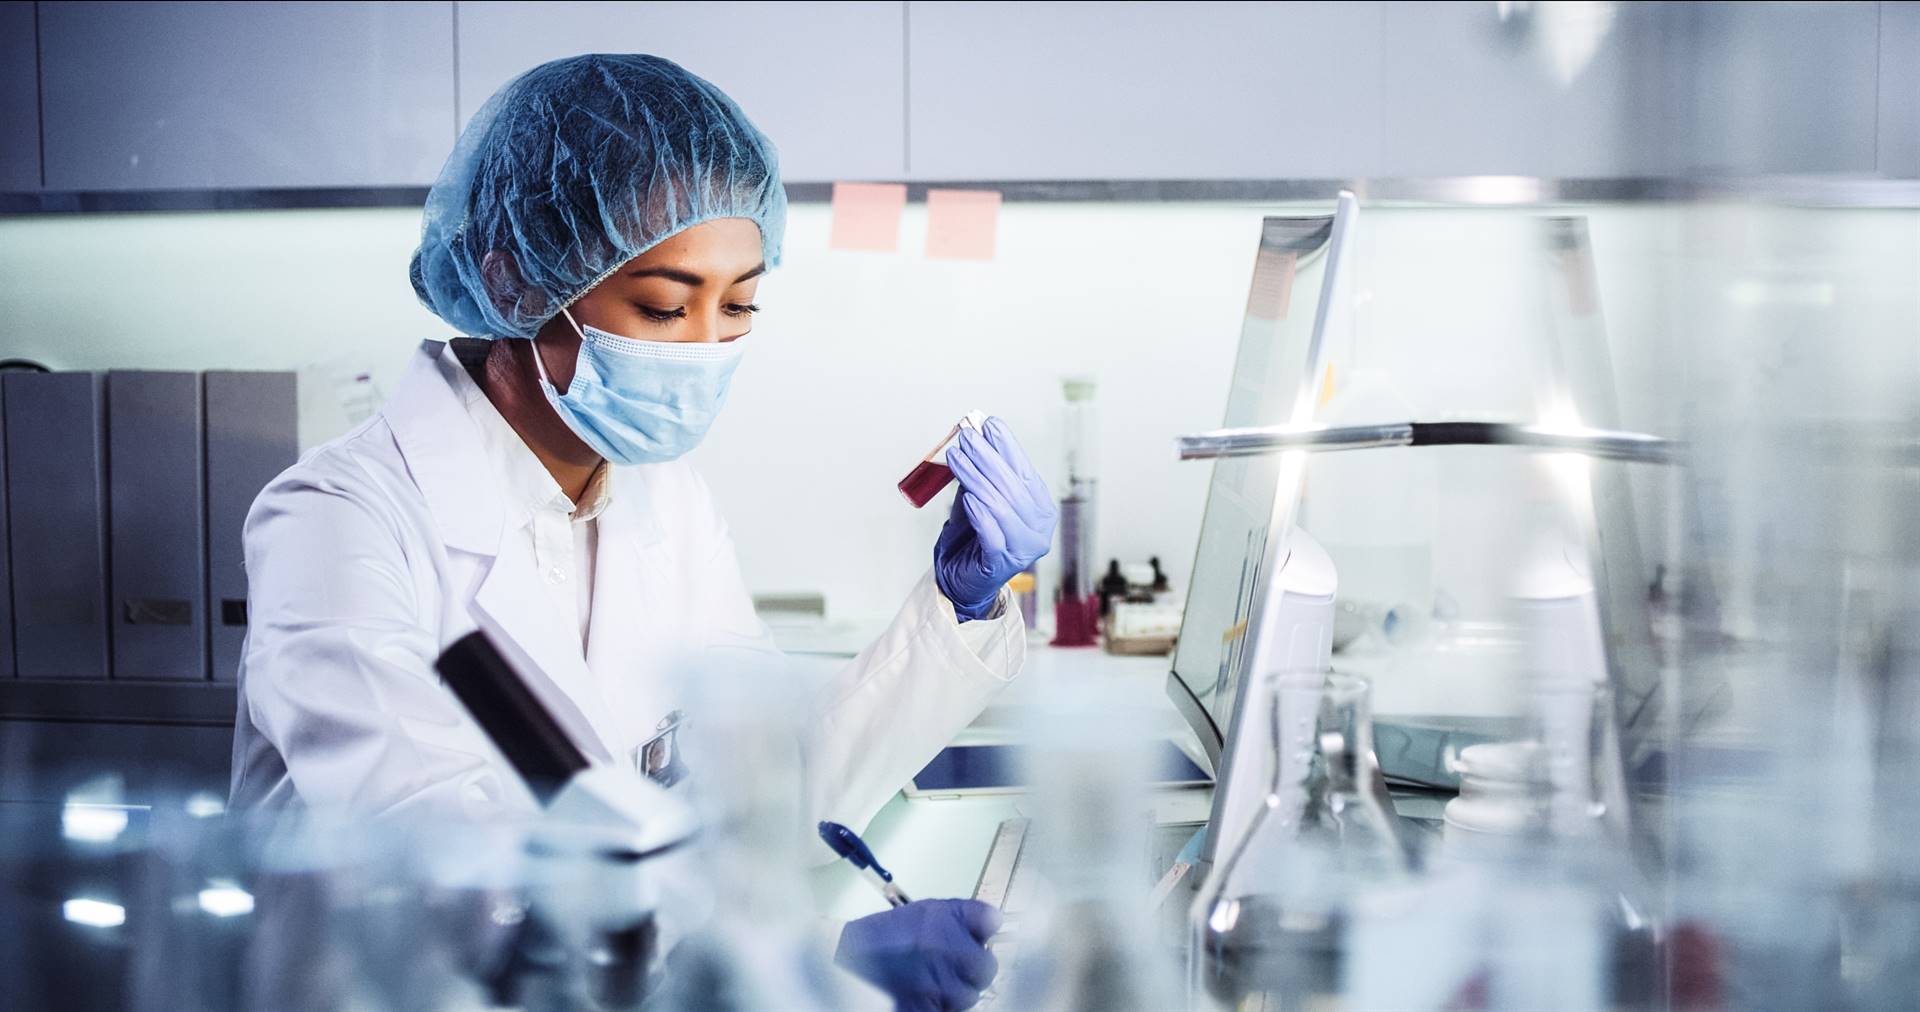 Despite the tremendous progress towards increasing women’s participation in science-related fields, a significant gender gap persists. Photo: iStock